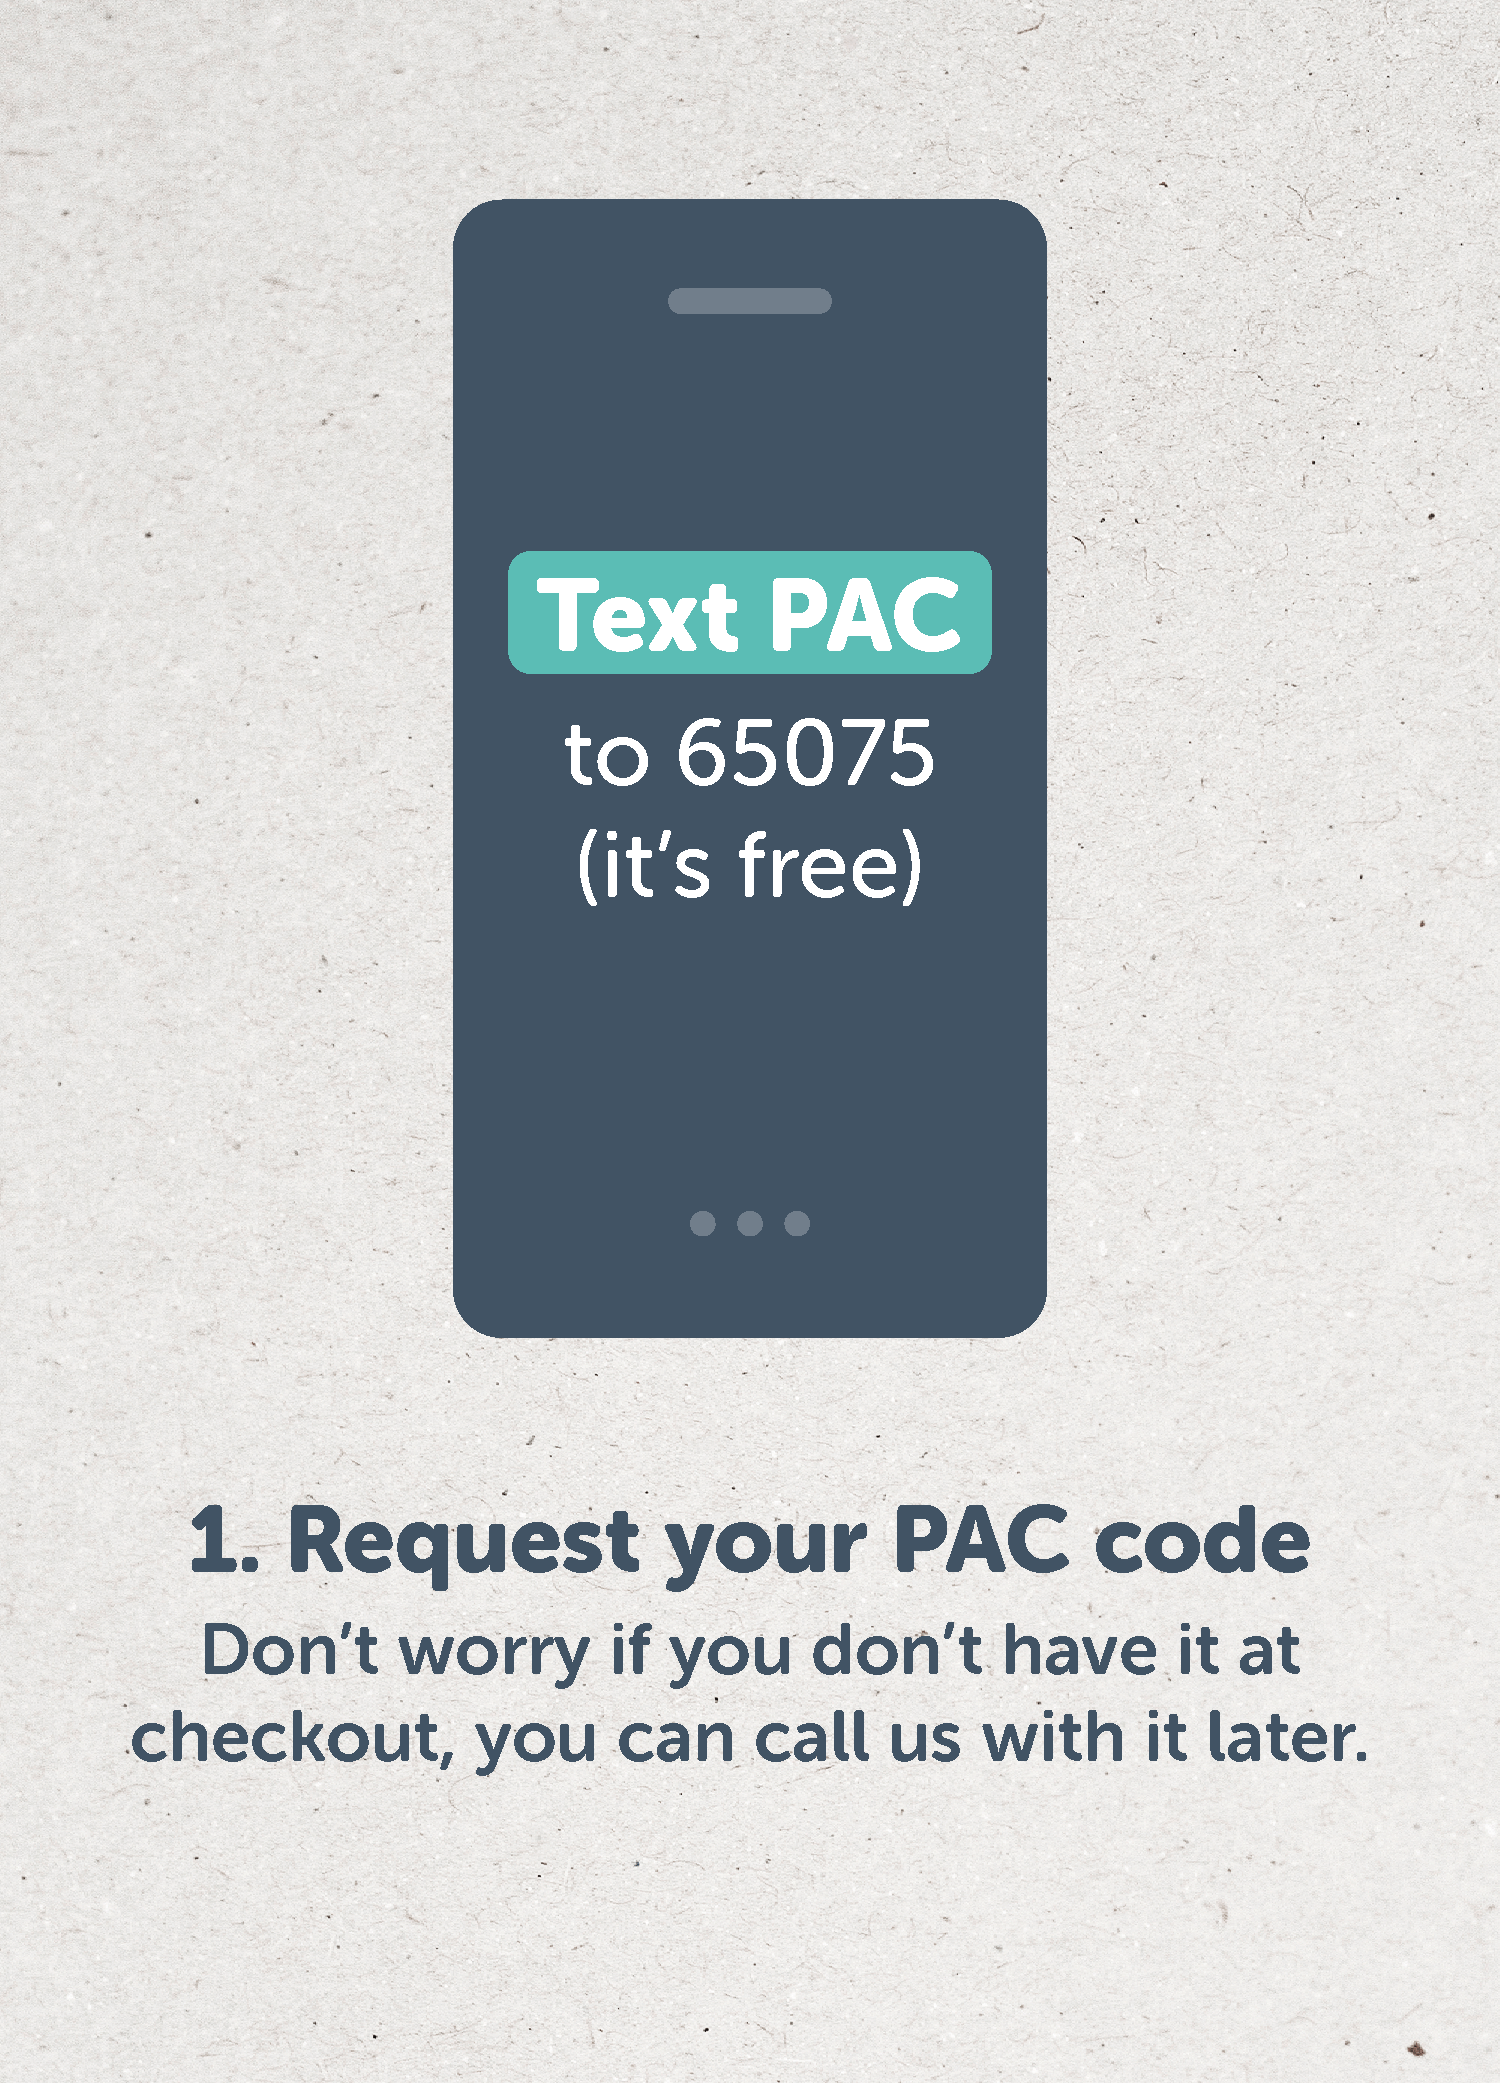 Request your PAC code